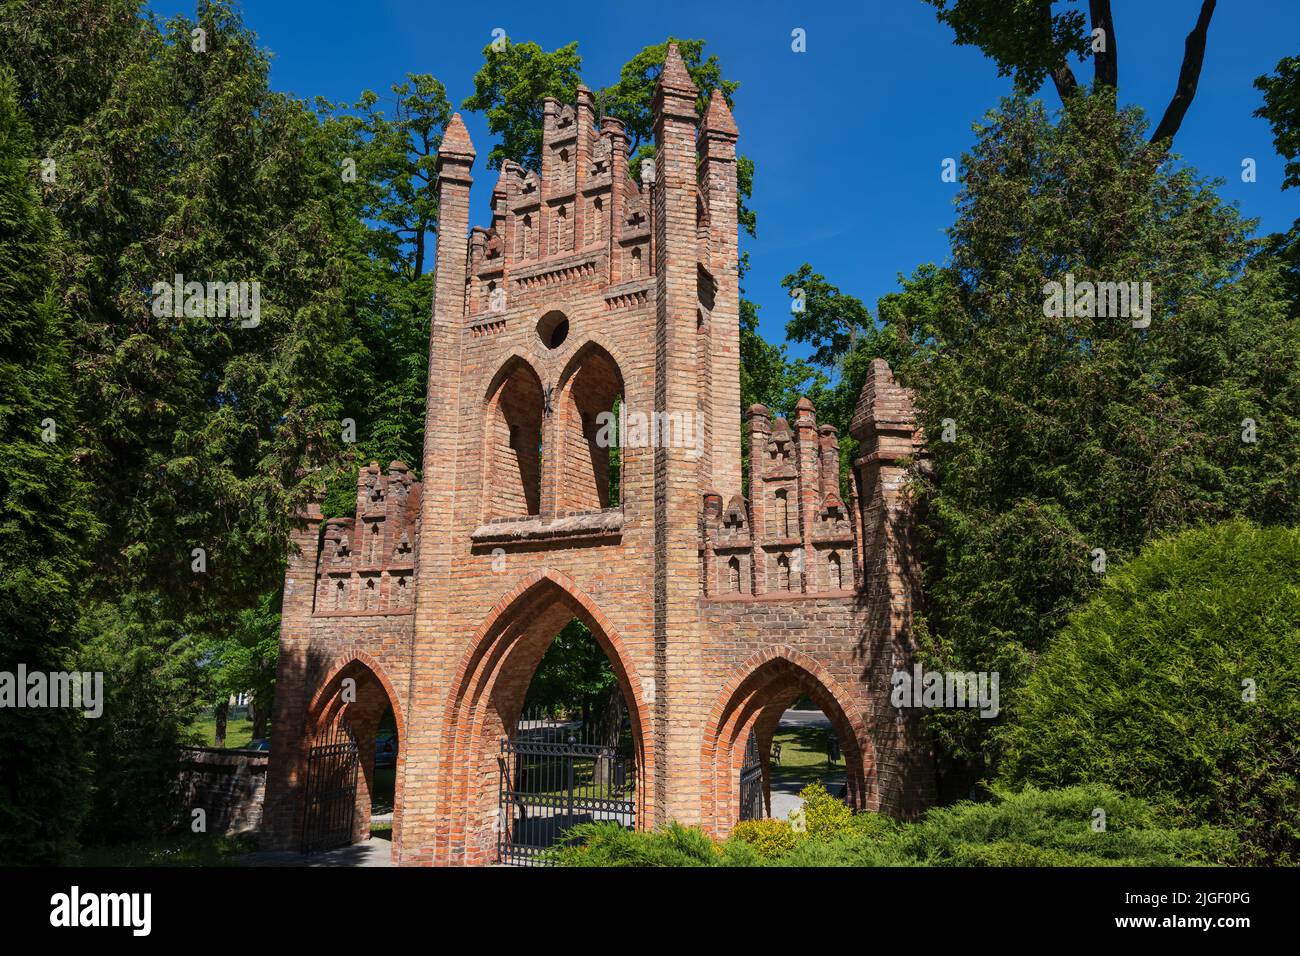 The Belfry Gate in Ciechanow, Poland. Neo-Gothic (Gothic Revival) style architecture with three ogival arcades with pinnacles, city landmark from the Stock Photo